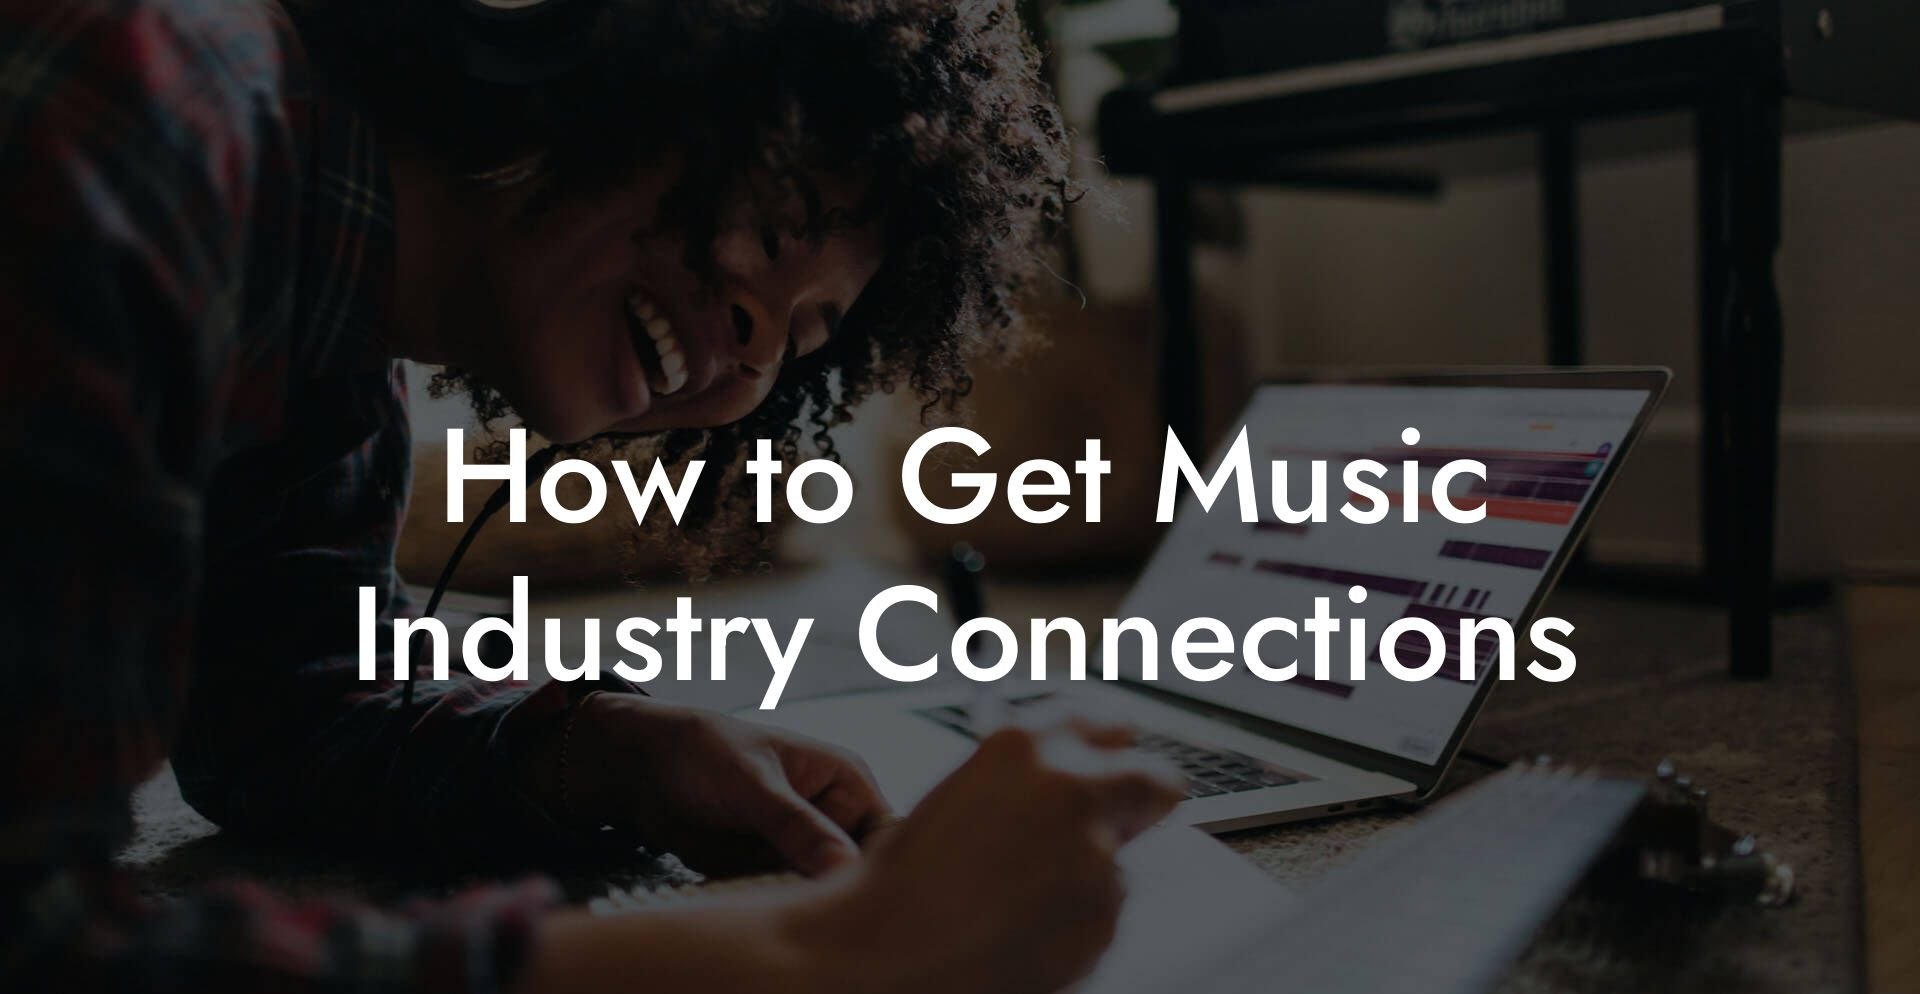 How to Get Music Industry Connections